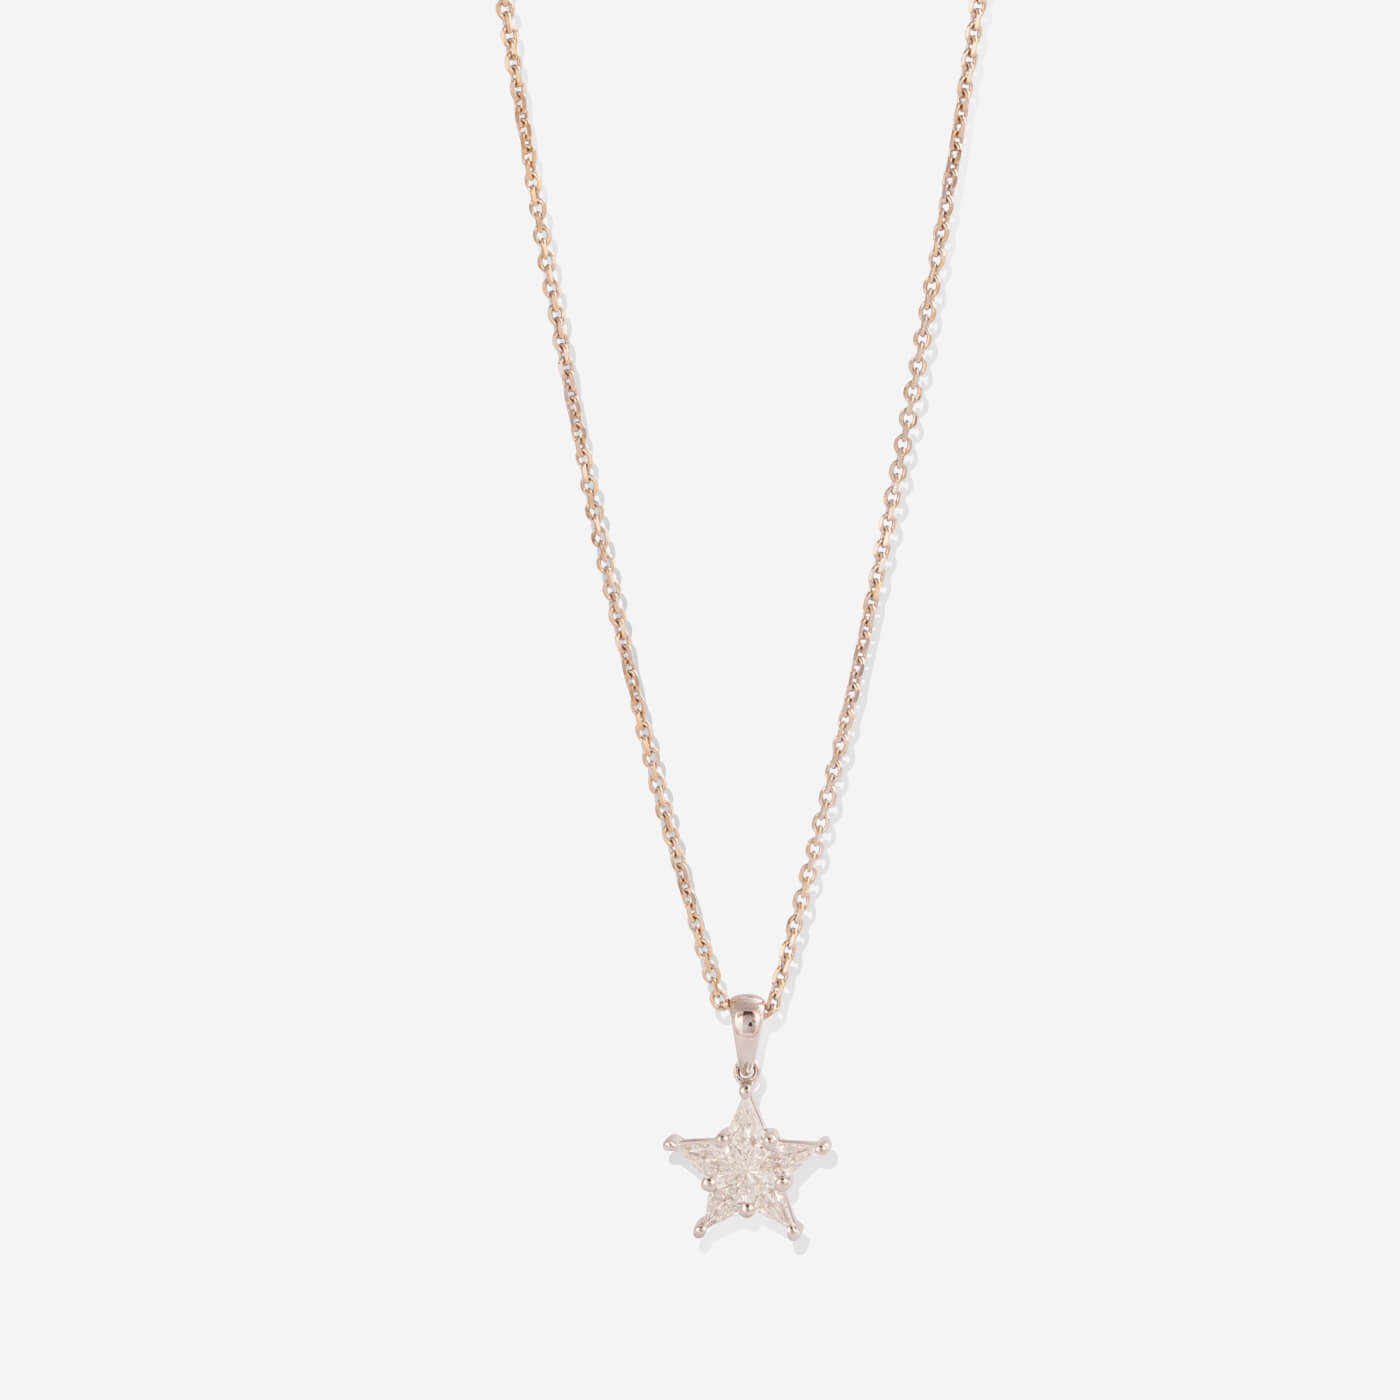 White Gold Star With Diamonds Necklace - Ref: KG00087